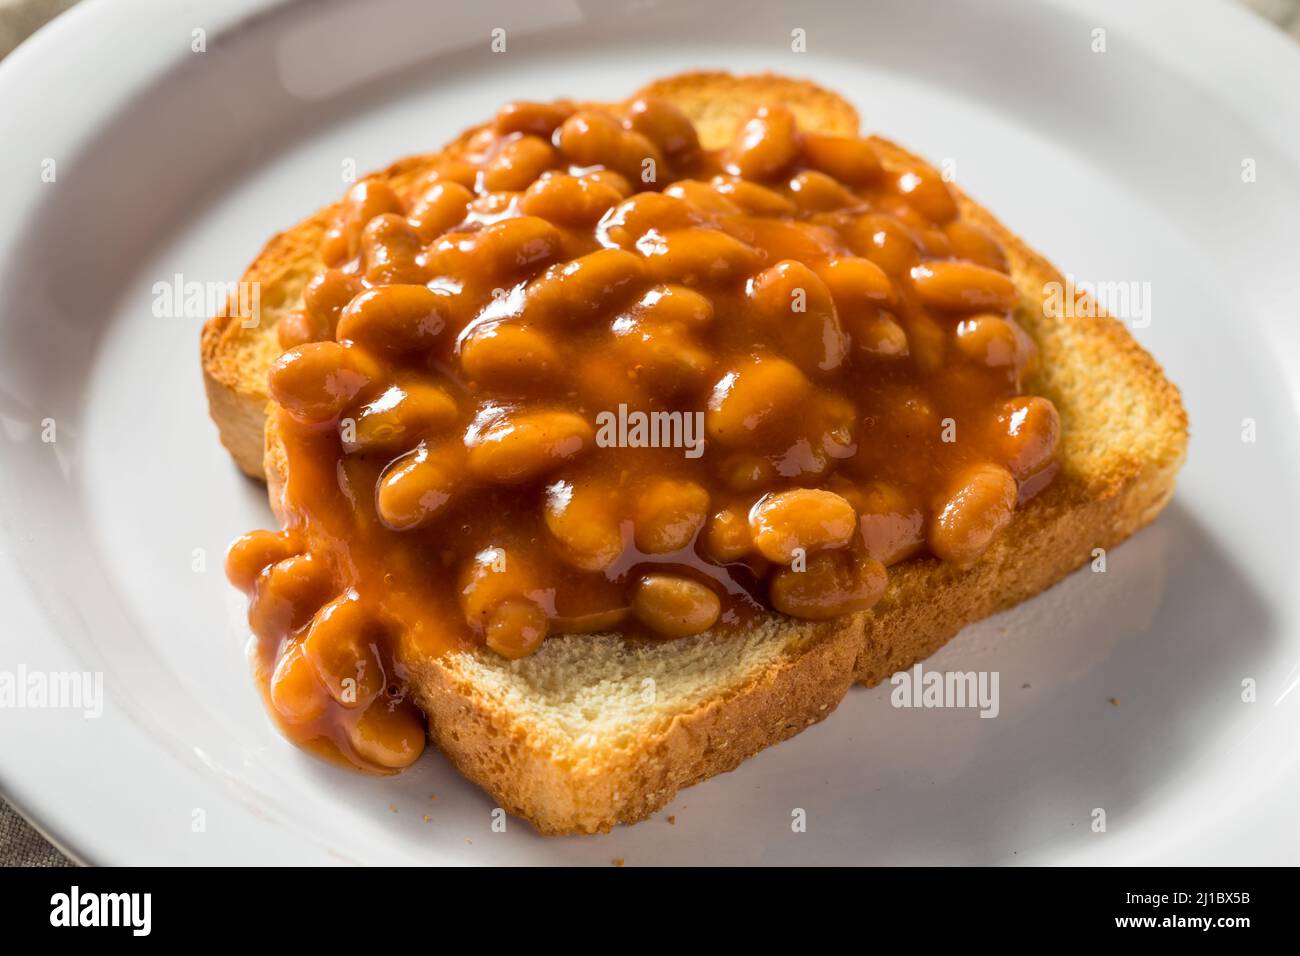 Homemade English Beans on Toast for Breakfast Stock Photo